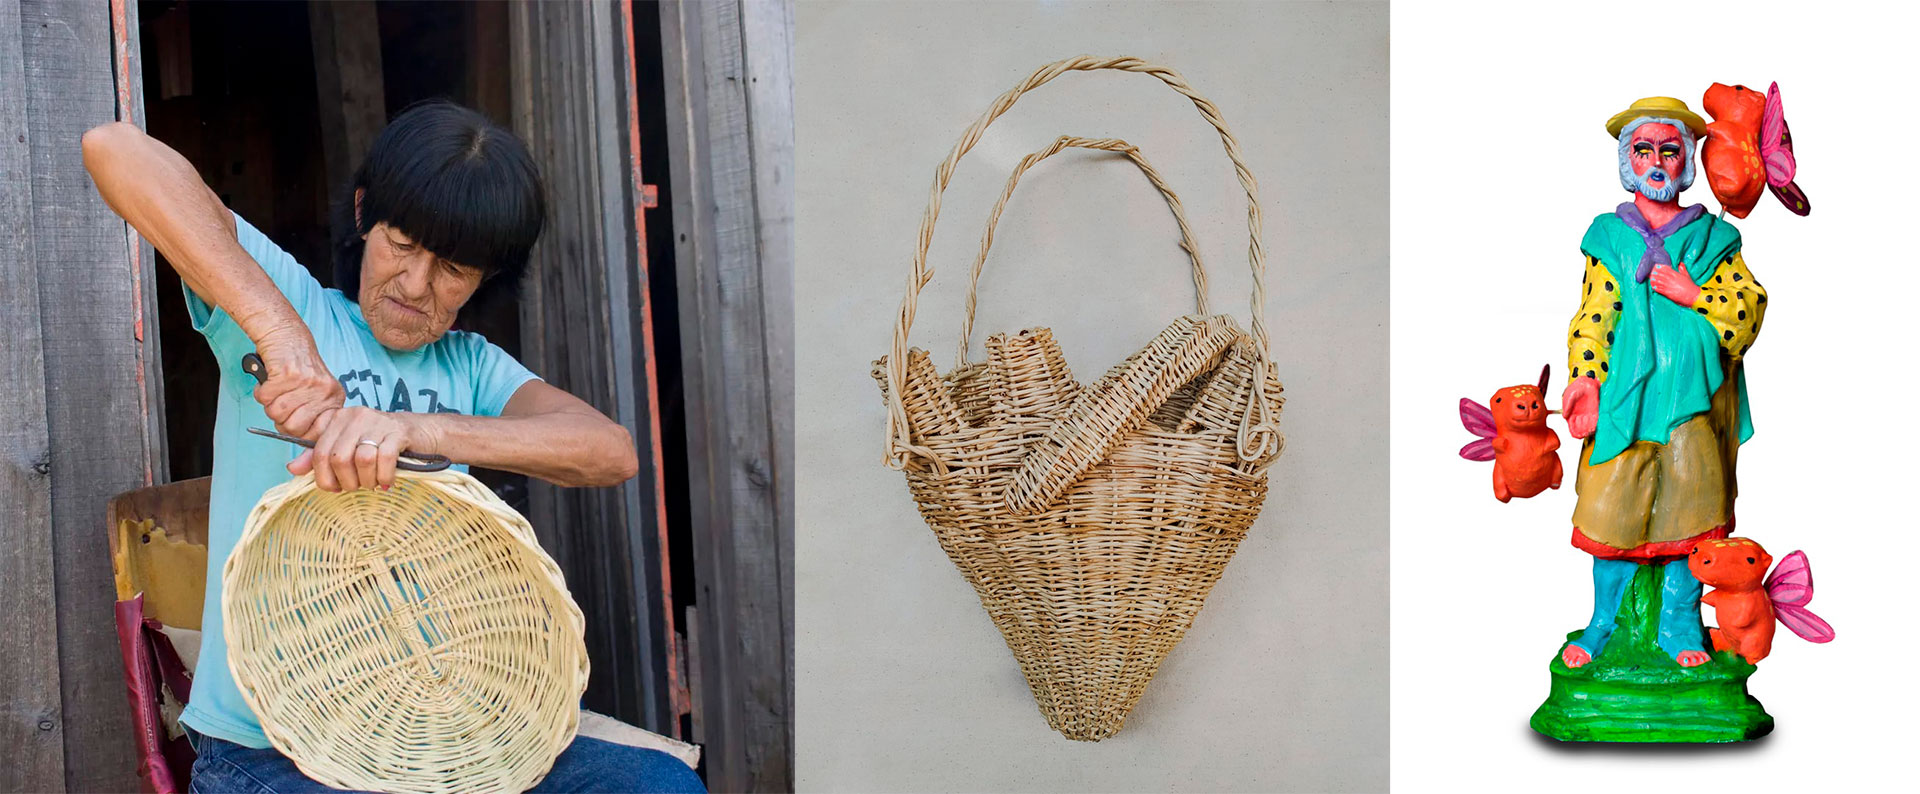 Zulma Montenegro, an artisan from Yapeyú, and works by Claudio Ojeda and Valentina Mariani 